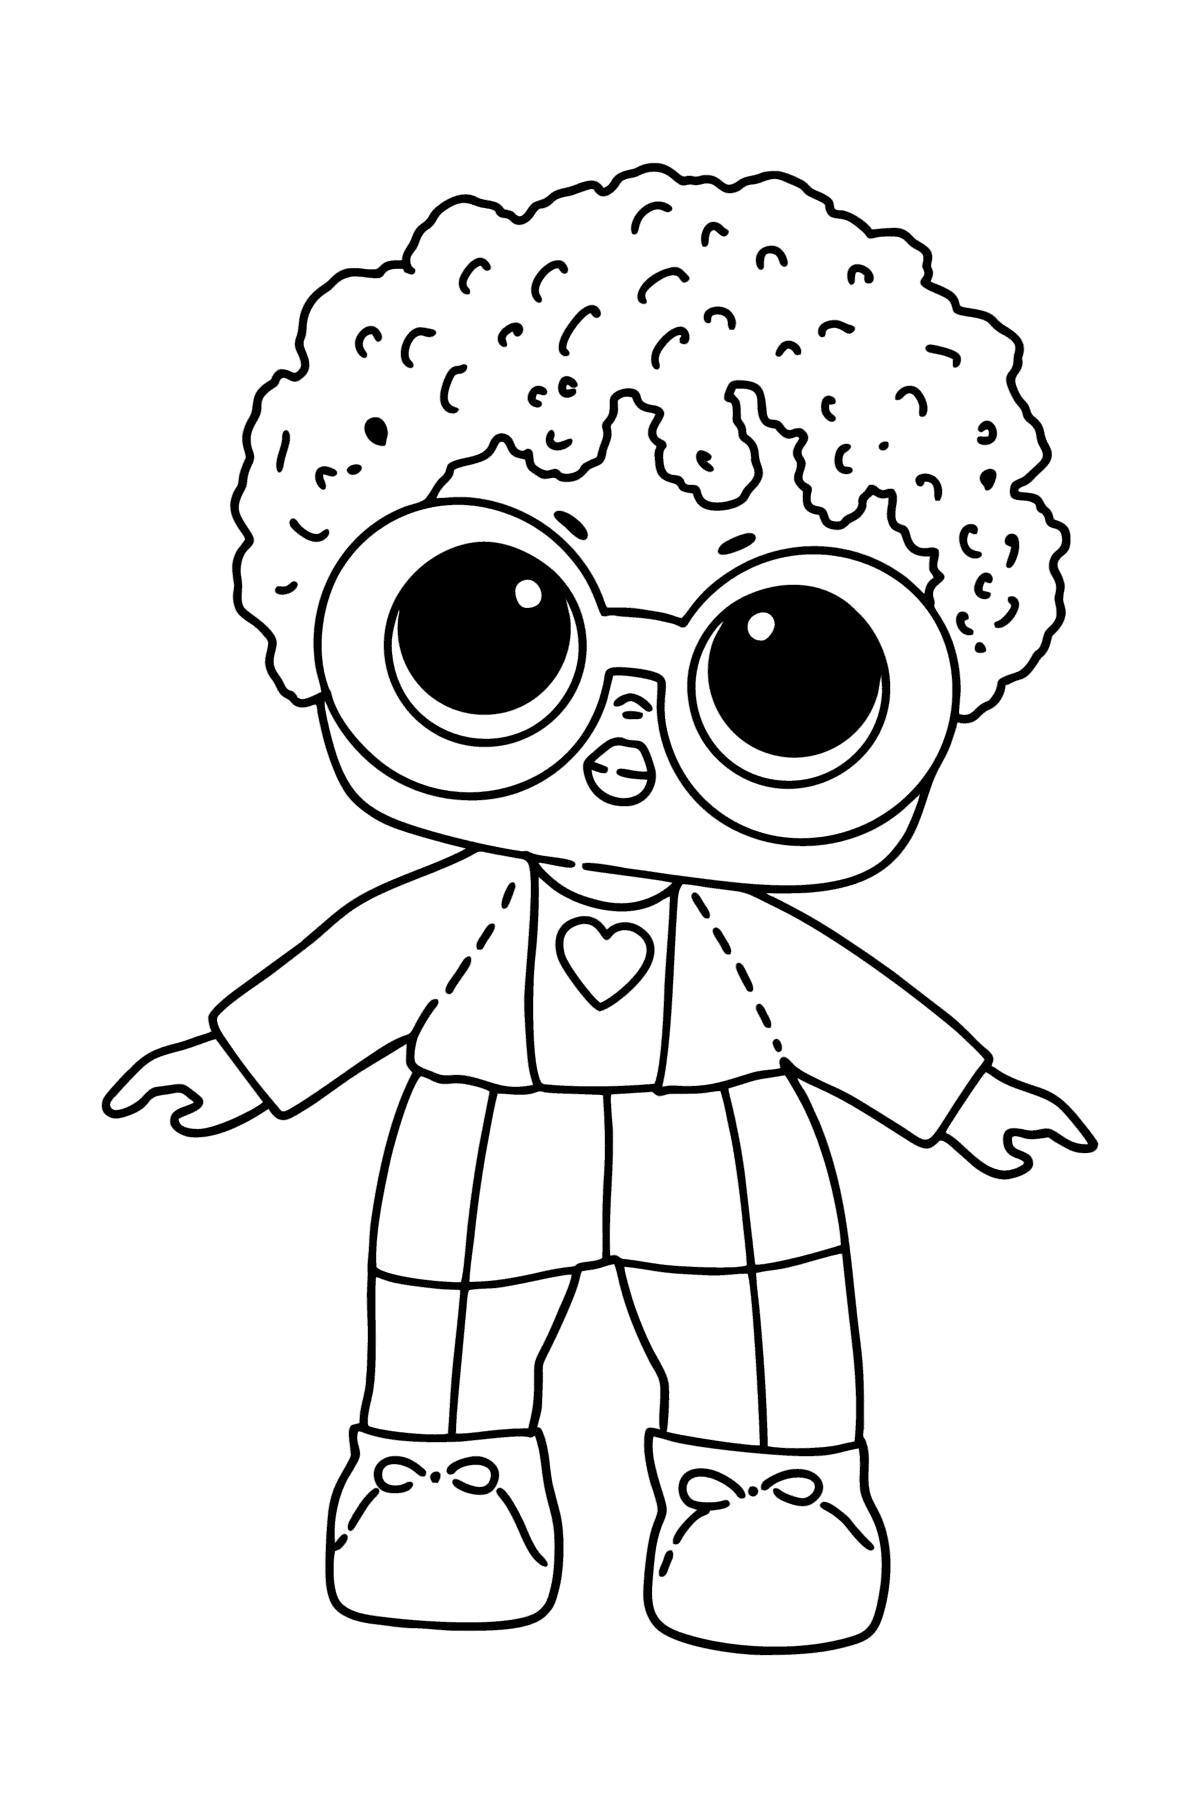 printable-coloring-pages-for-kids-lol